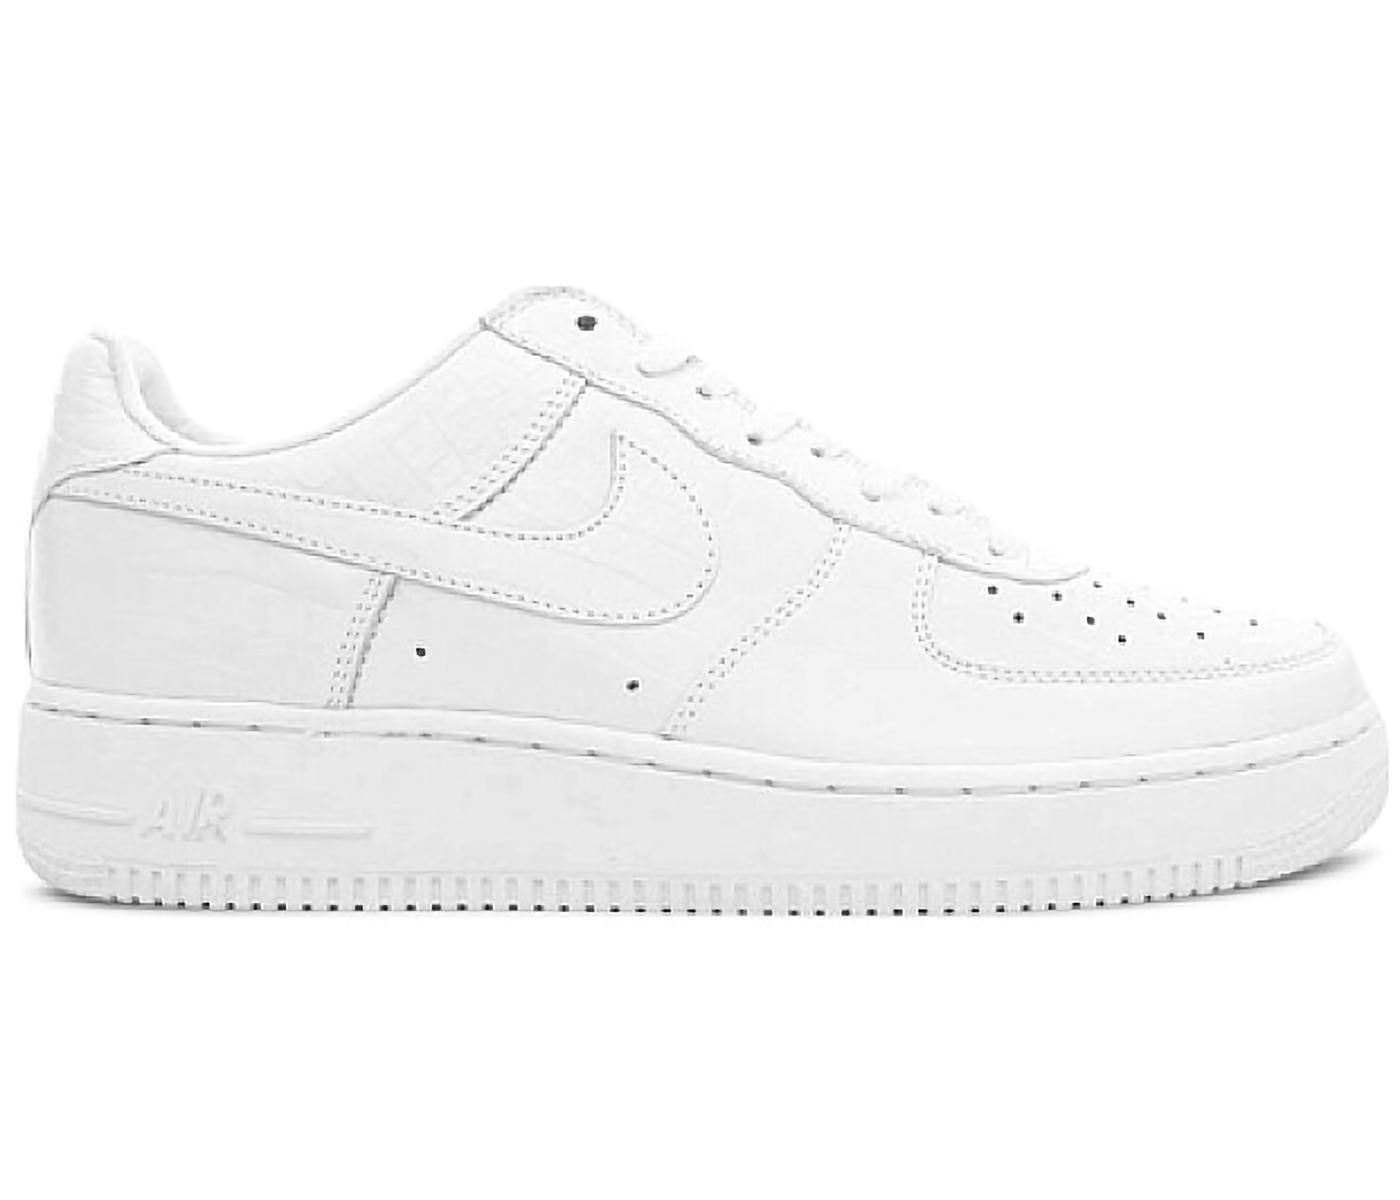 NIKE Air force 1 low HTM 2マークパーカーMA